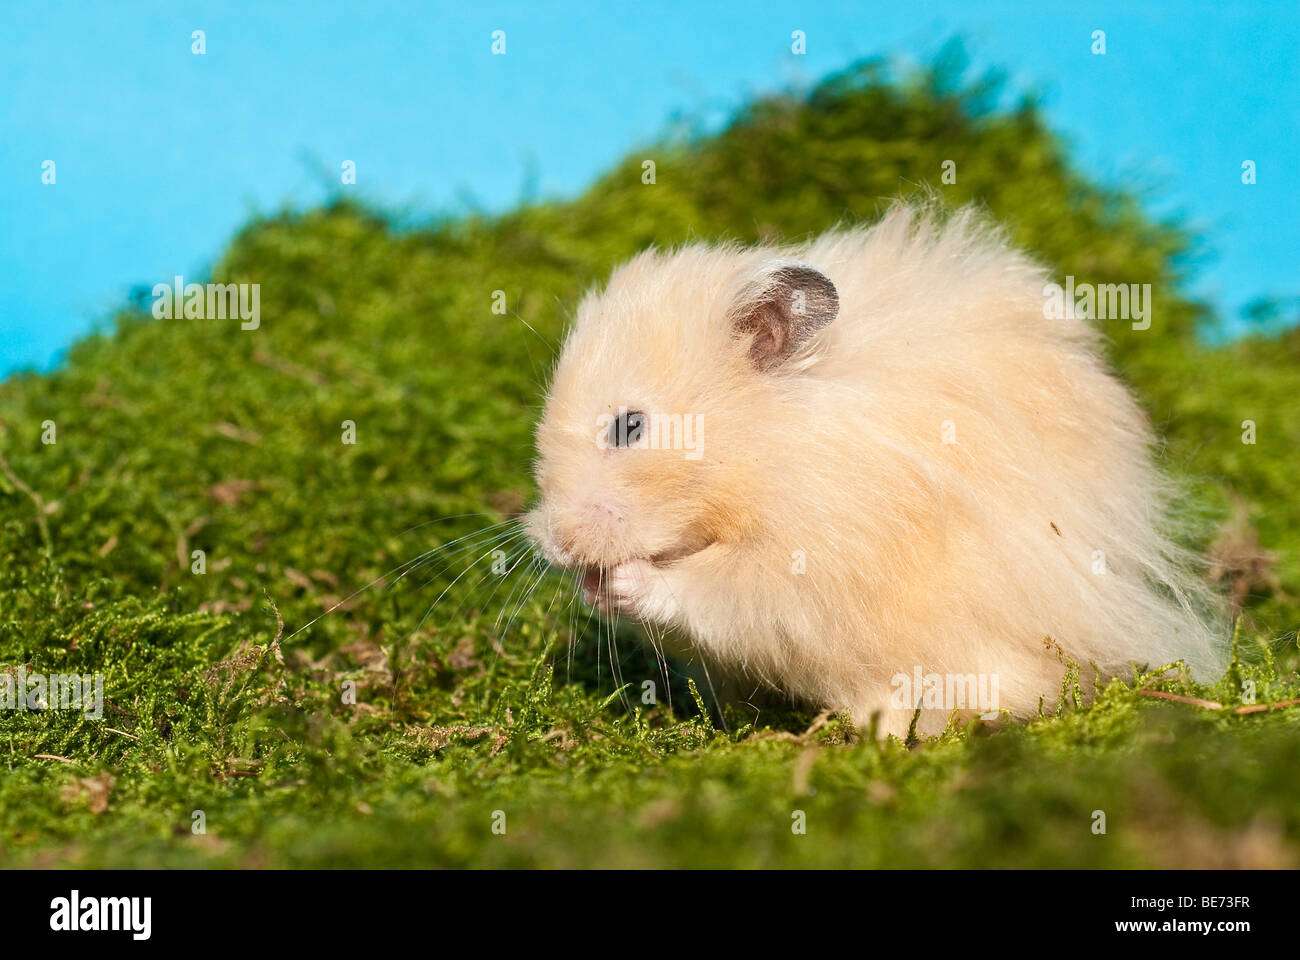 Golden hamster cleaning itself Stock Photo